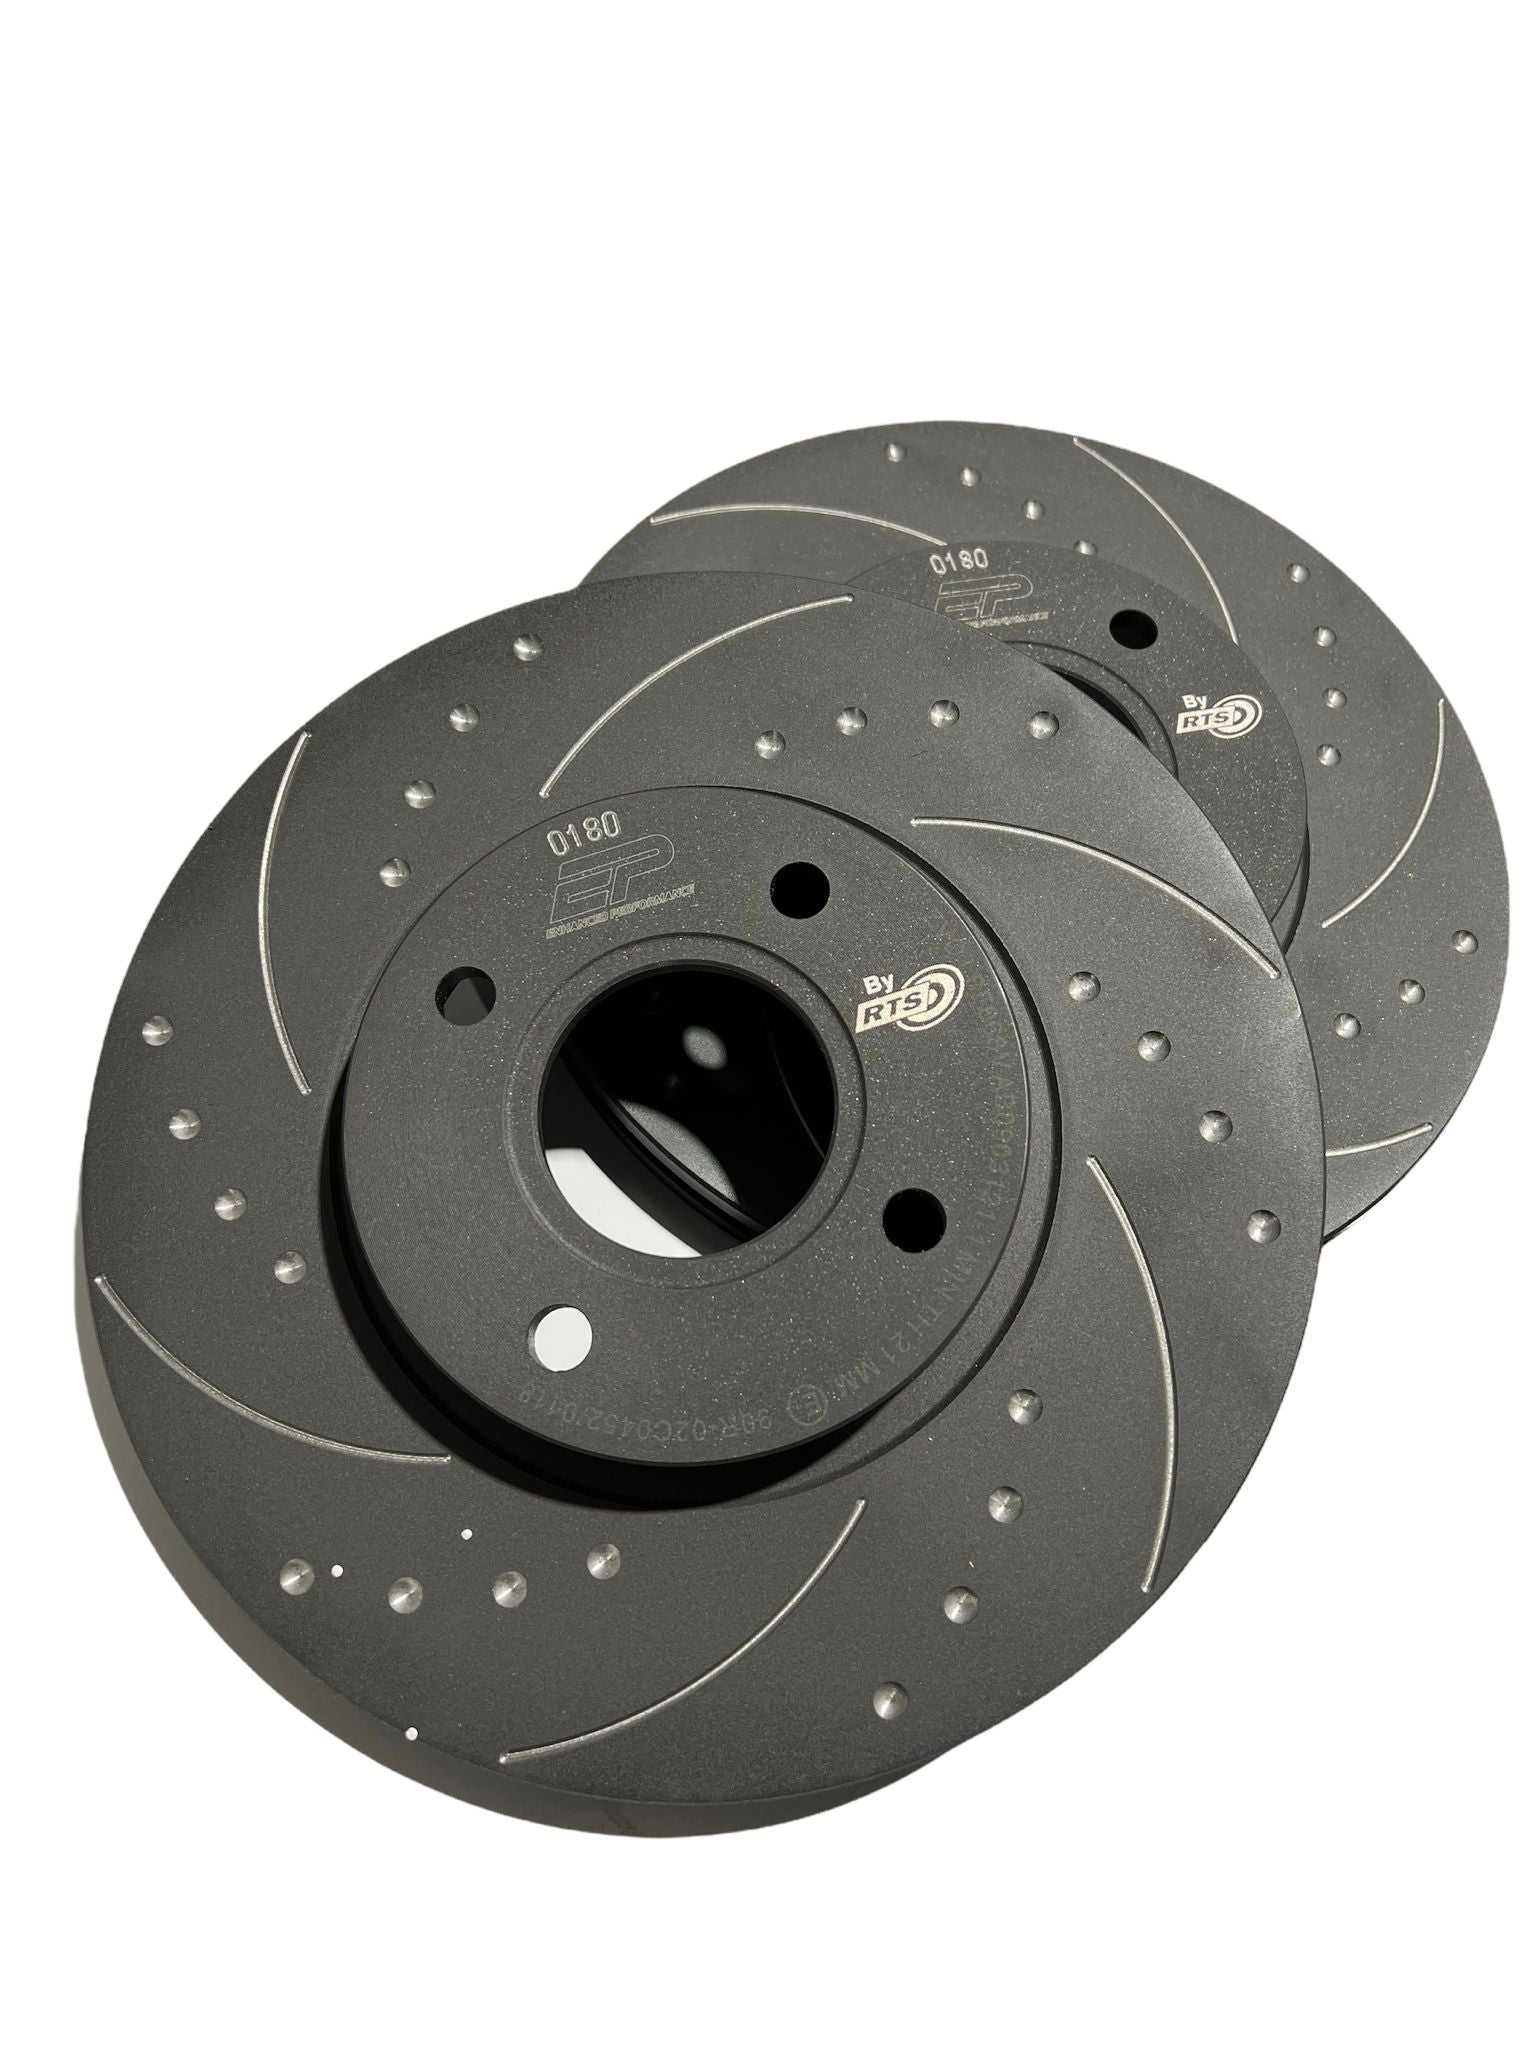 Enhanced Performance, Enhanced Performance (By RTS) Brake Disc Upgrade - MK8 Fiesta ST - Dimpled & Grooved